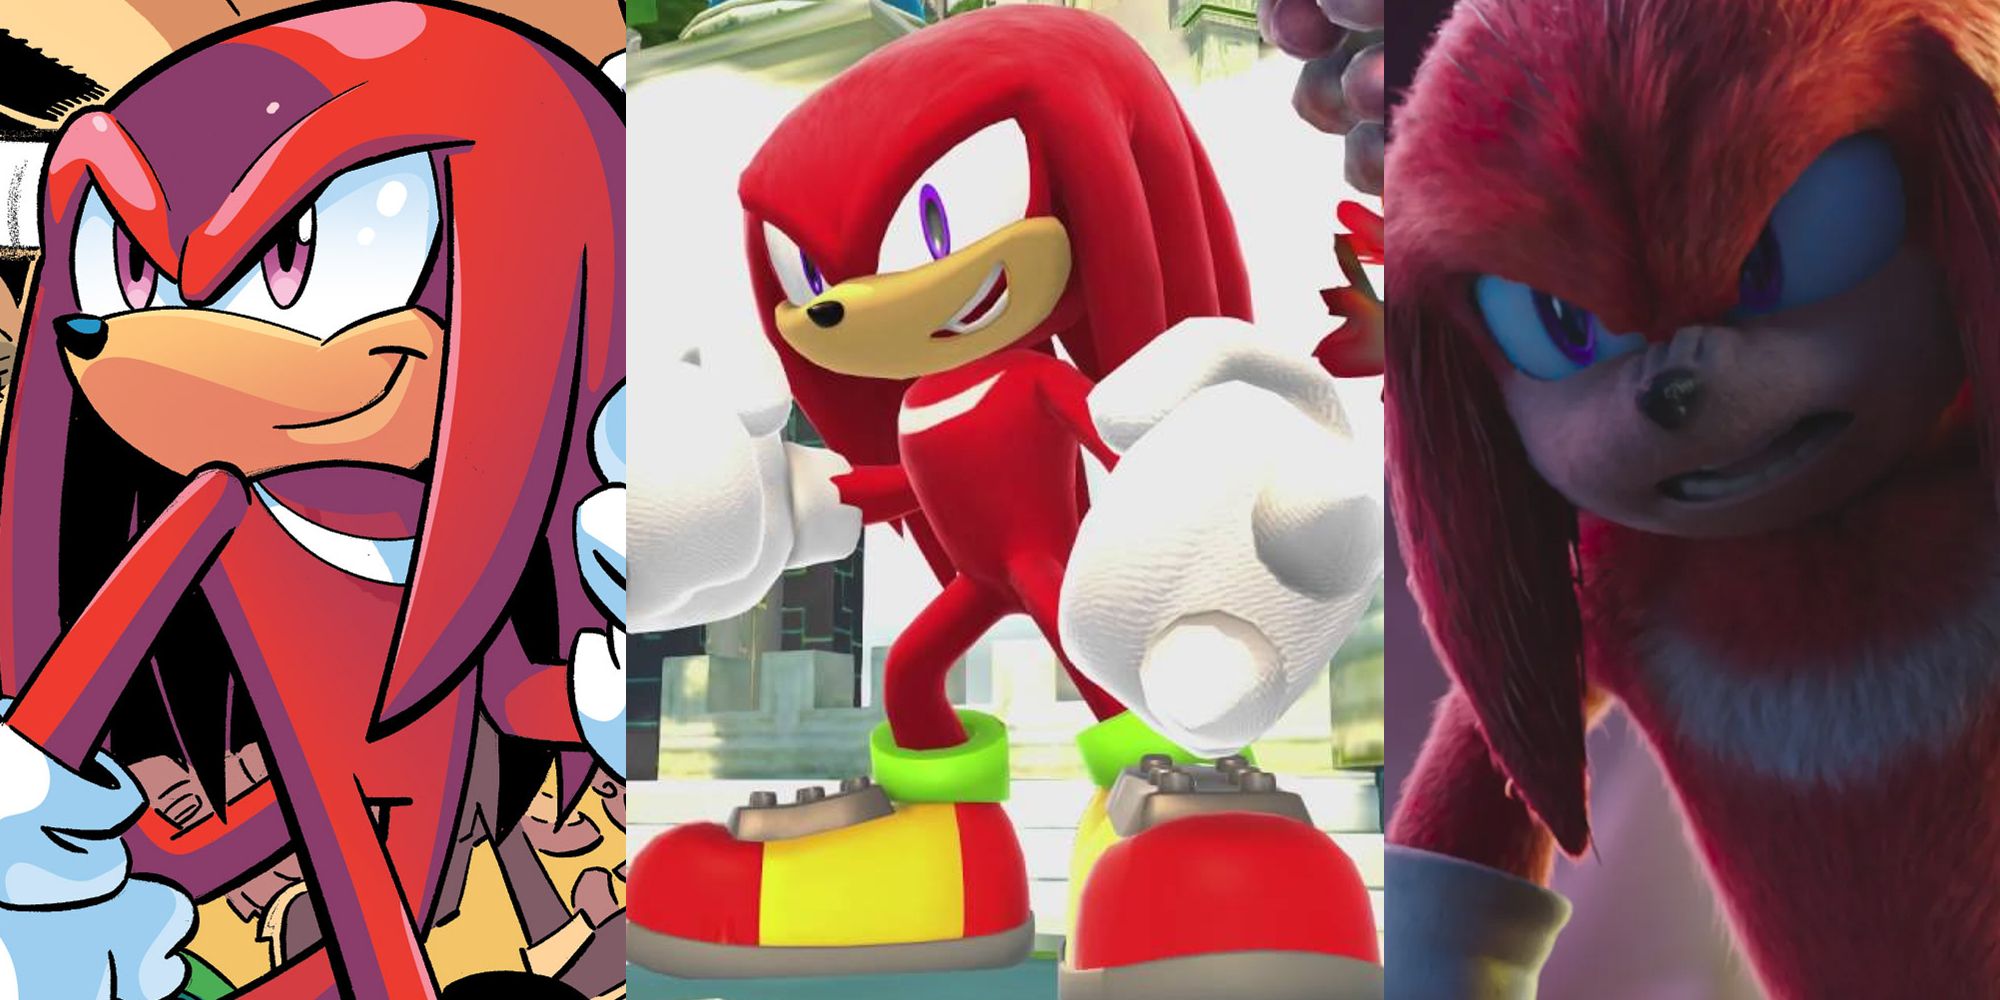 Knuckles appearing in an Archie Comics panel; Knuckles posing in Sonic Generations; Knuckles looking angry in Sonic the Hedgehog 2 (2022)